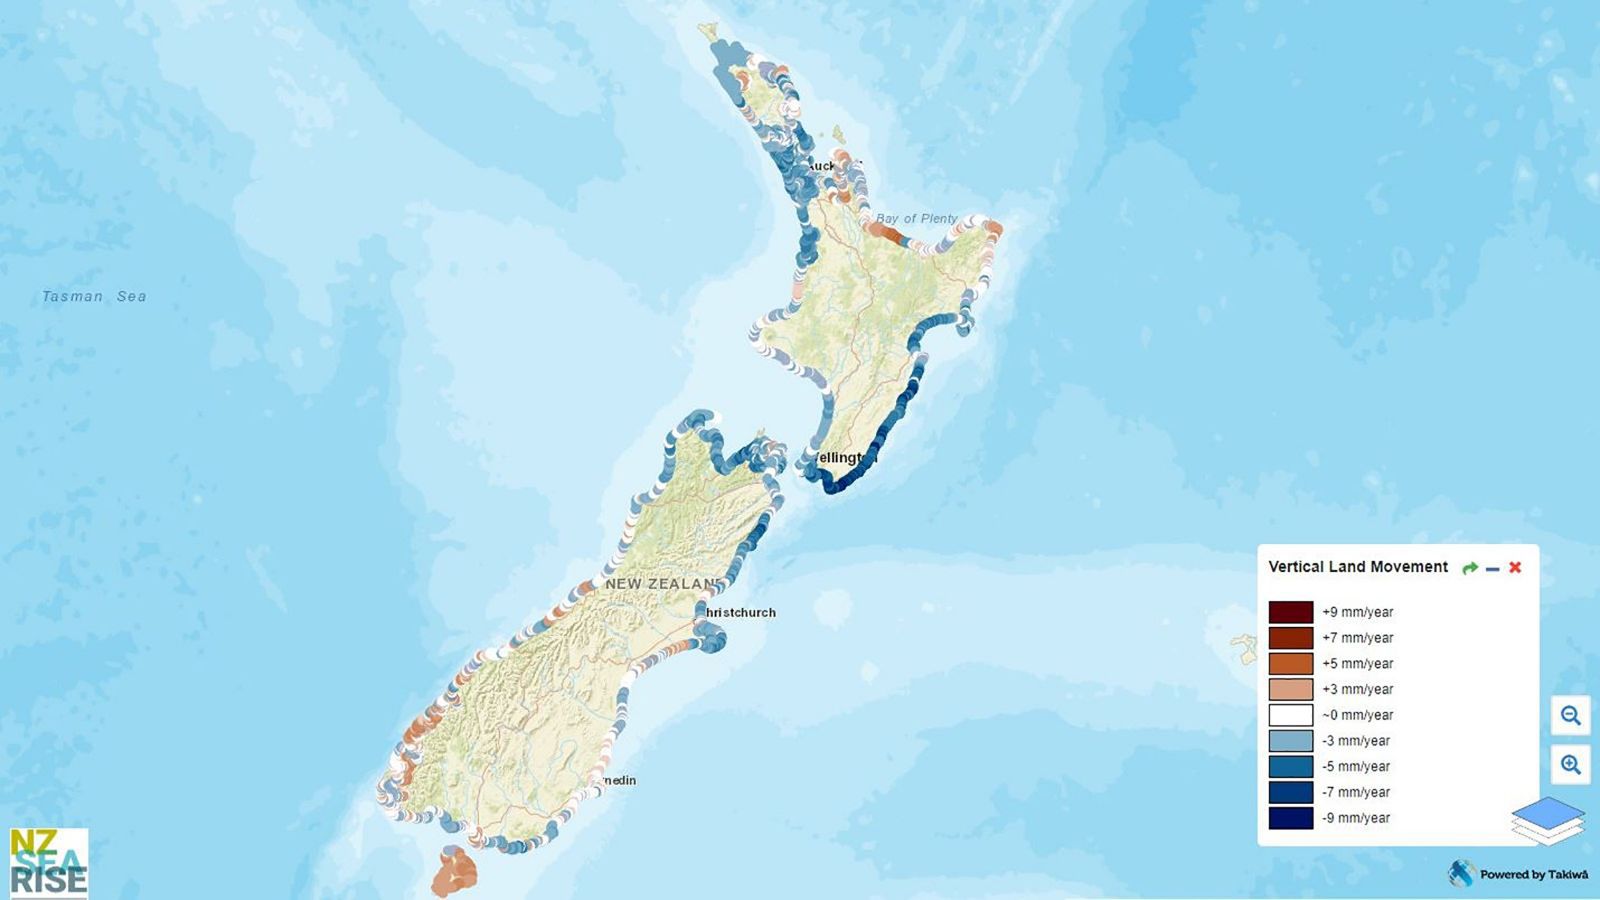 A map of New Zealand showing projected coastal sea level rise